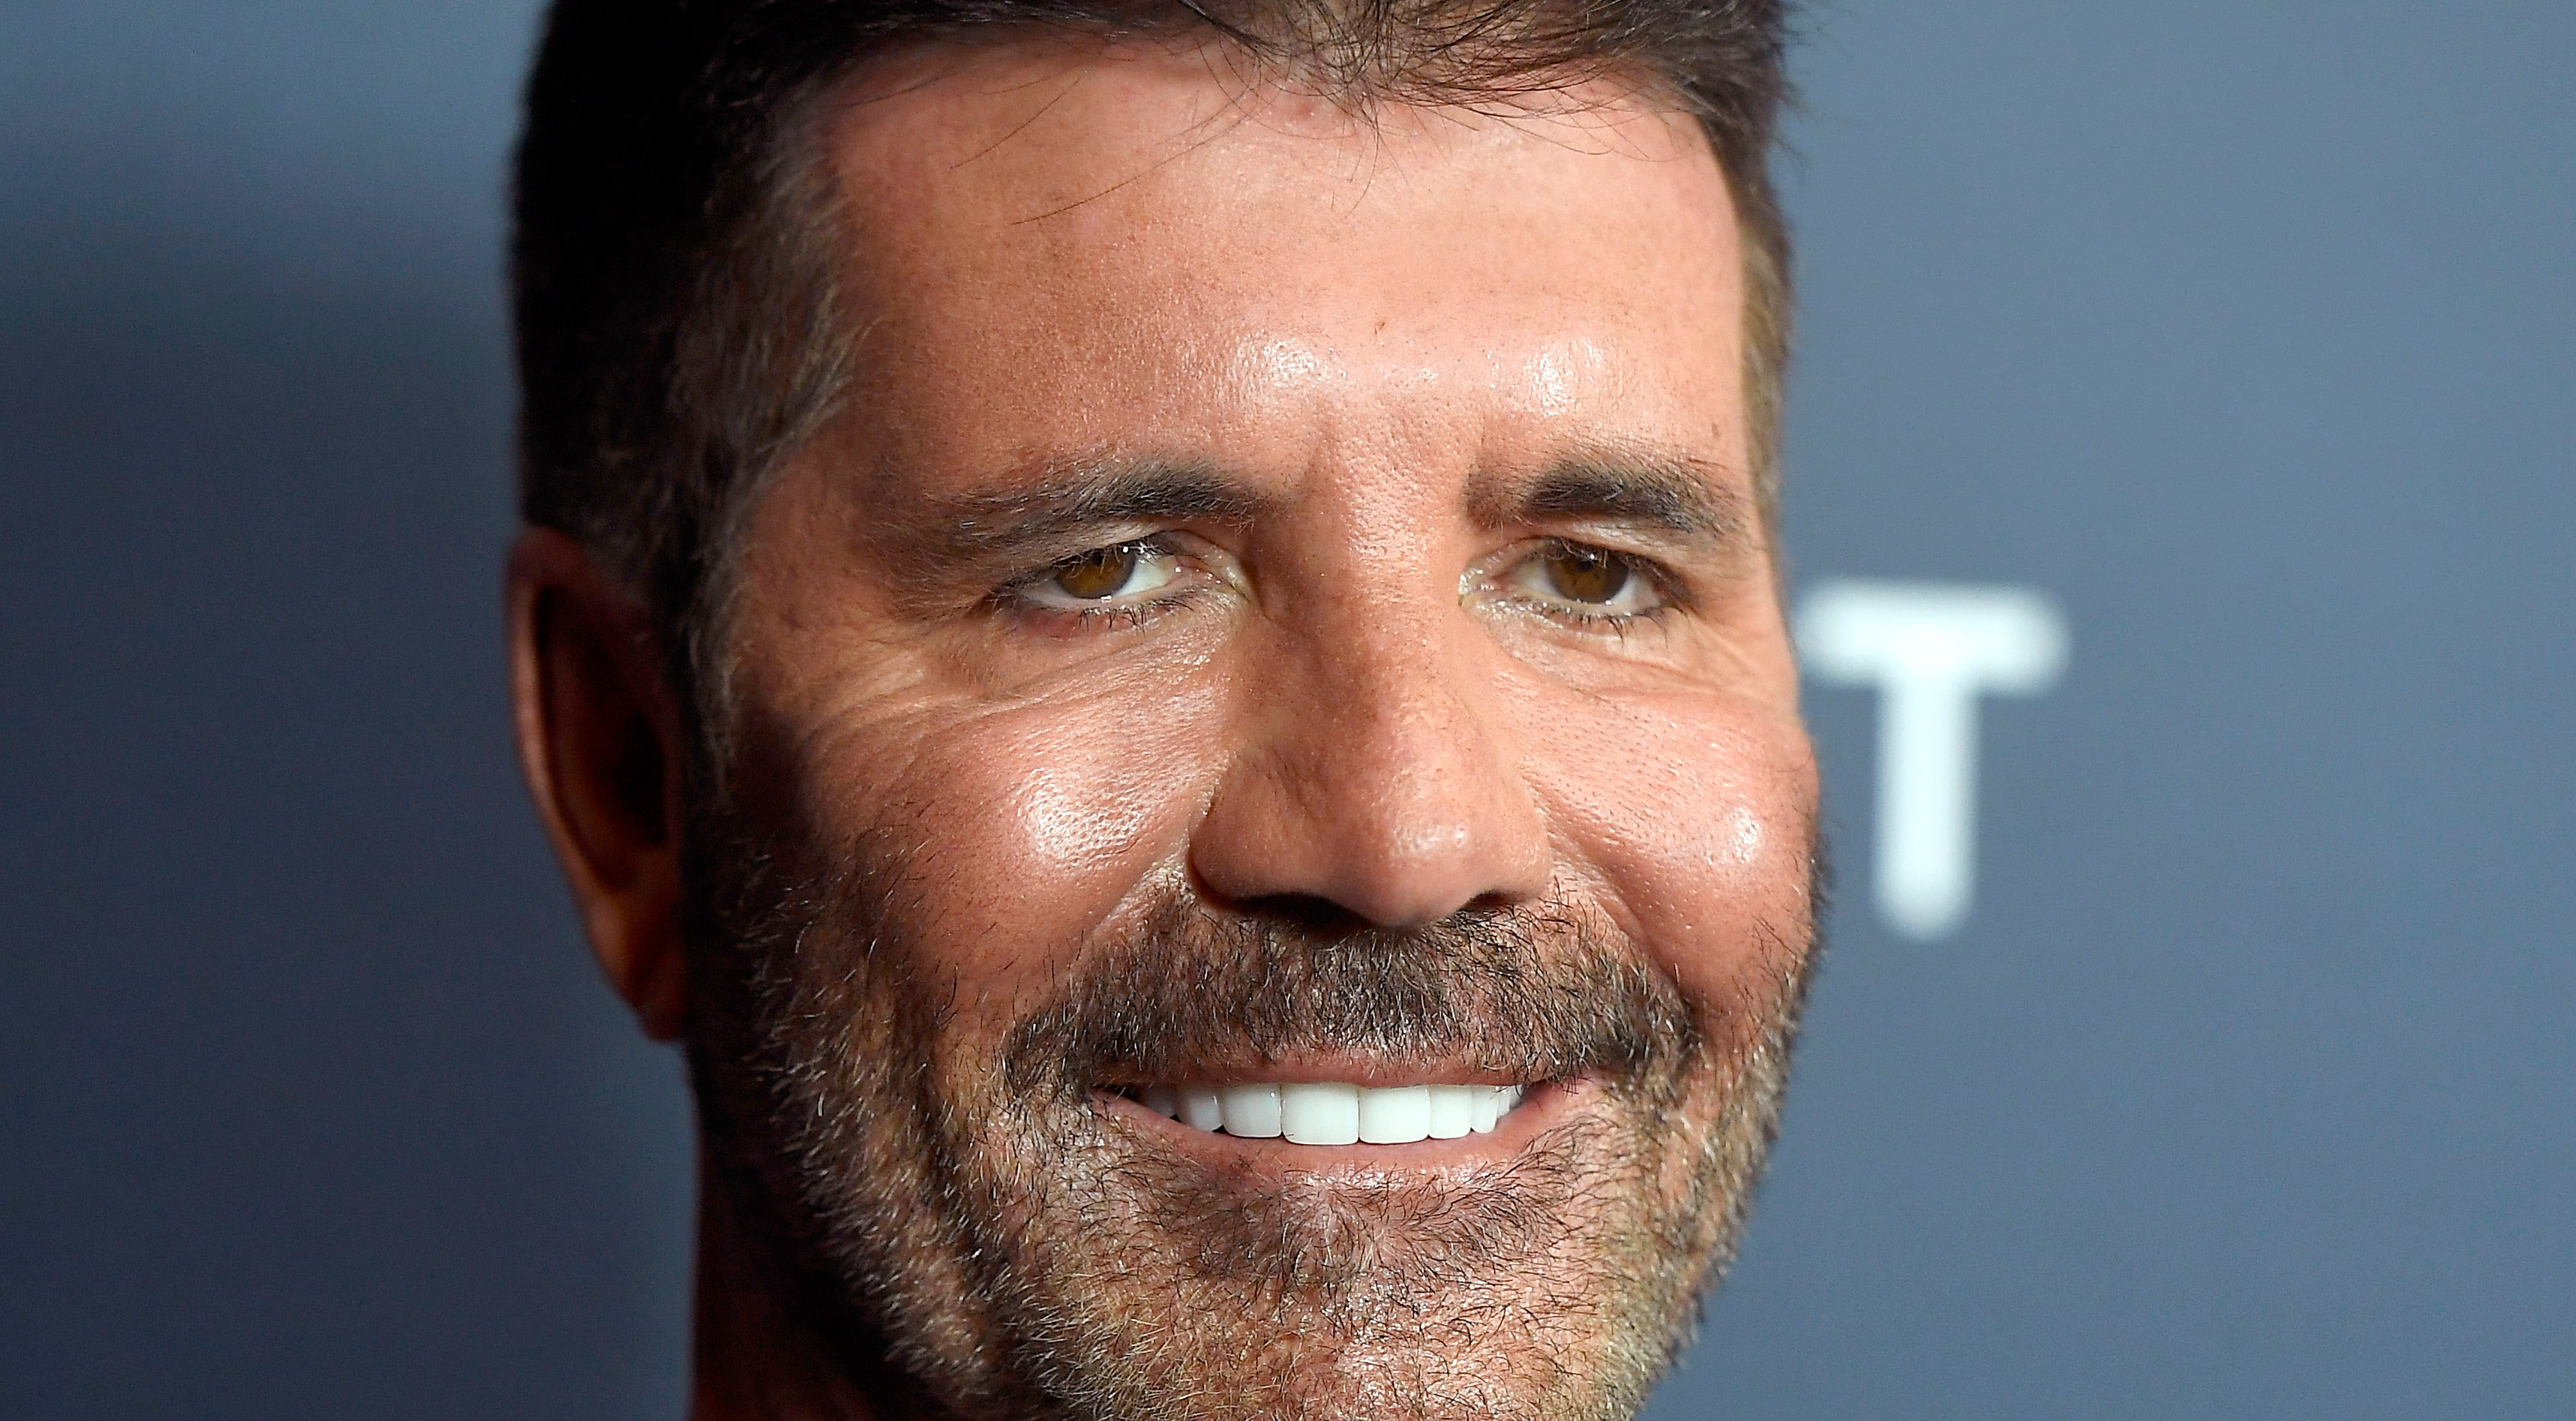 Simon Cowell's New Face Is Freaking Out The BroBible